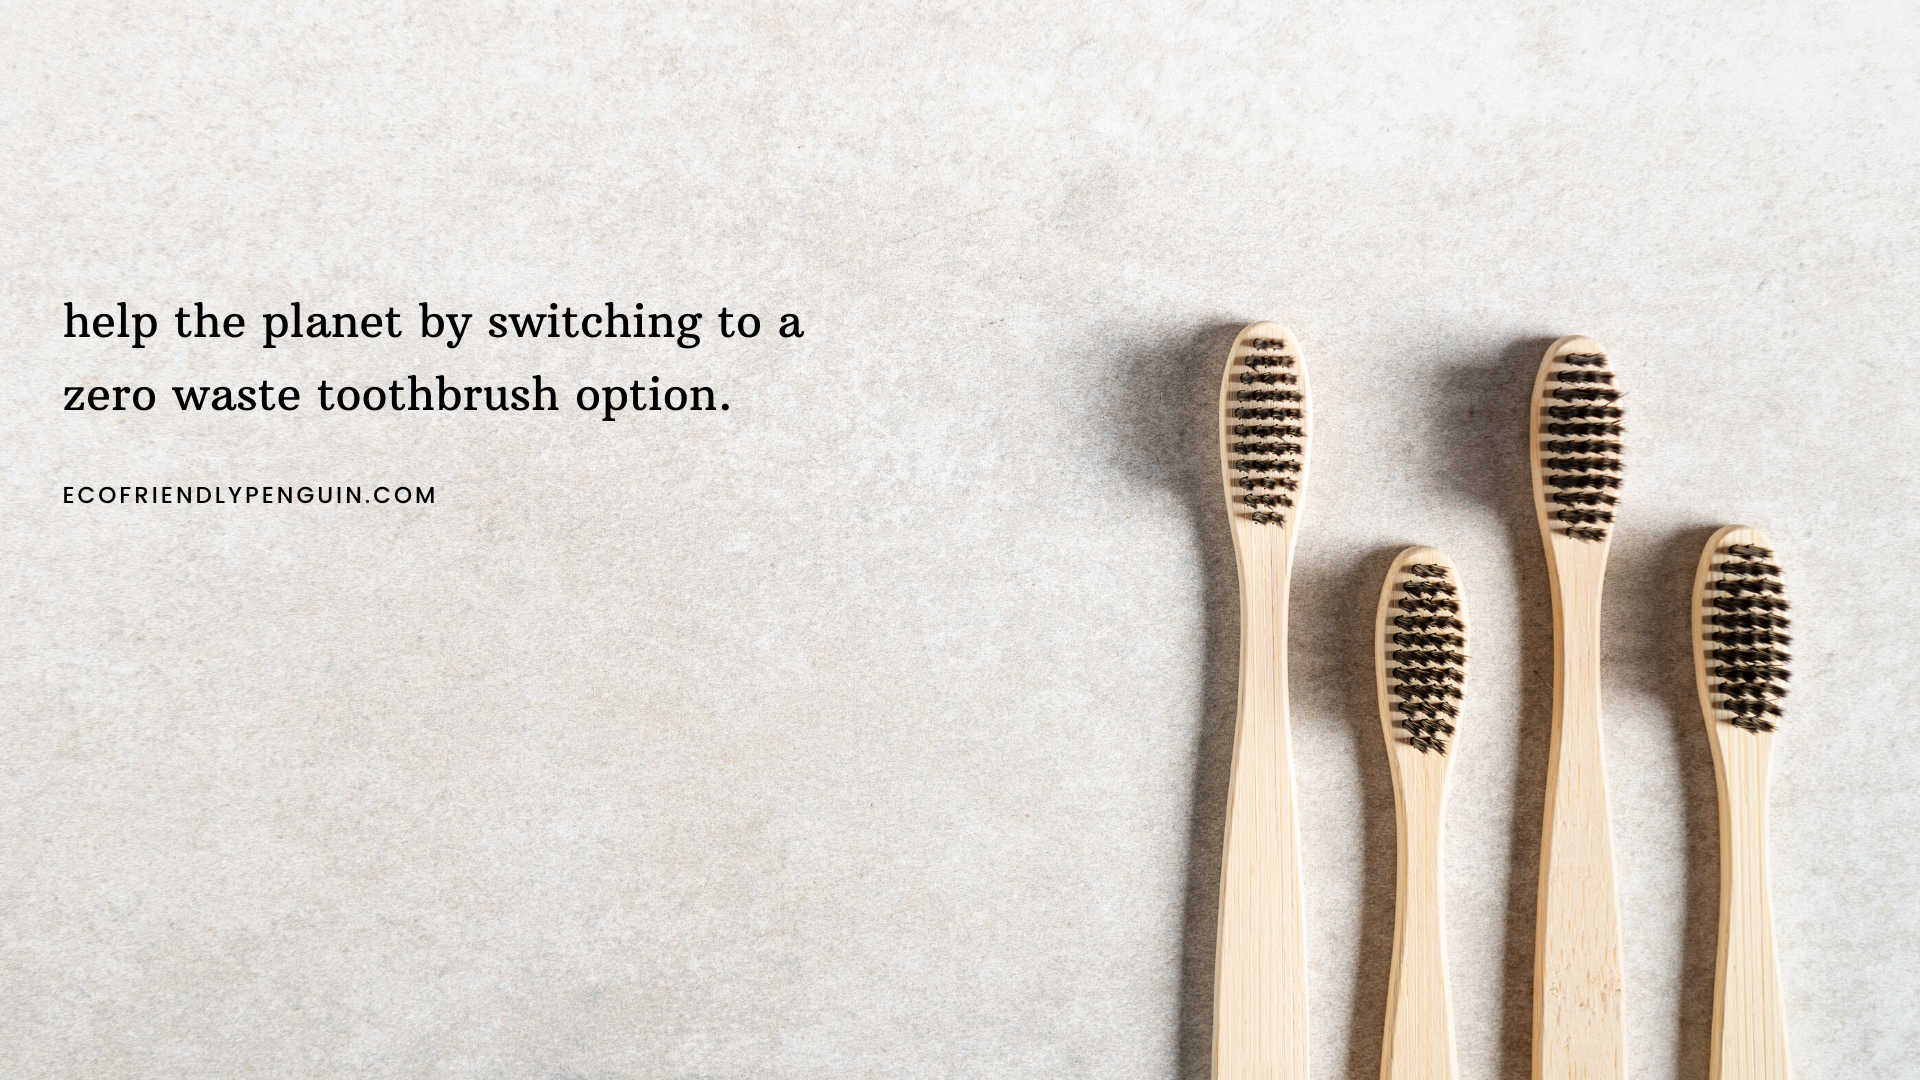 You are currently viewing Bamboo Toothbrushes for a Zero Waste Toothbrush Option